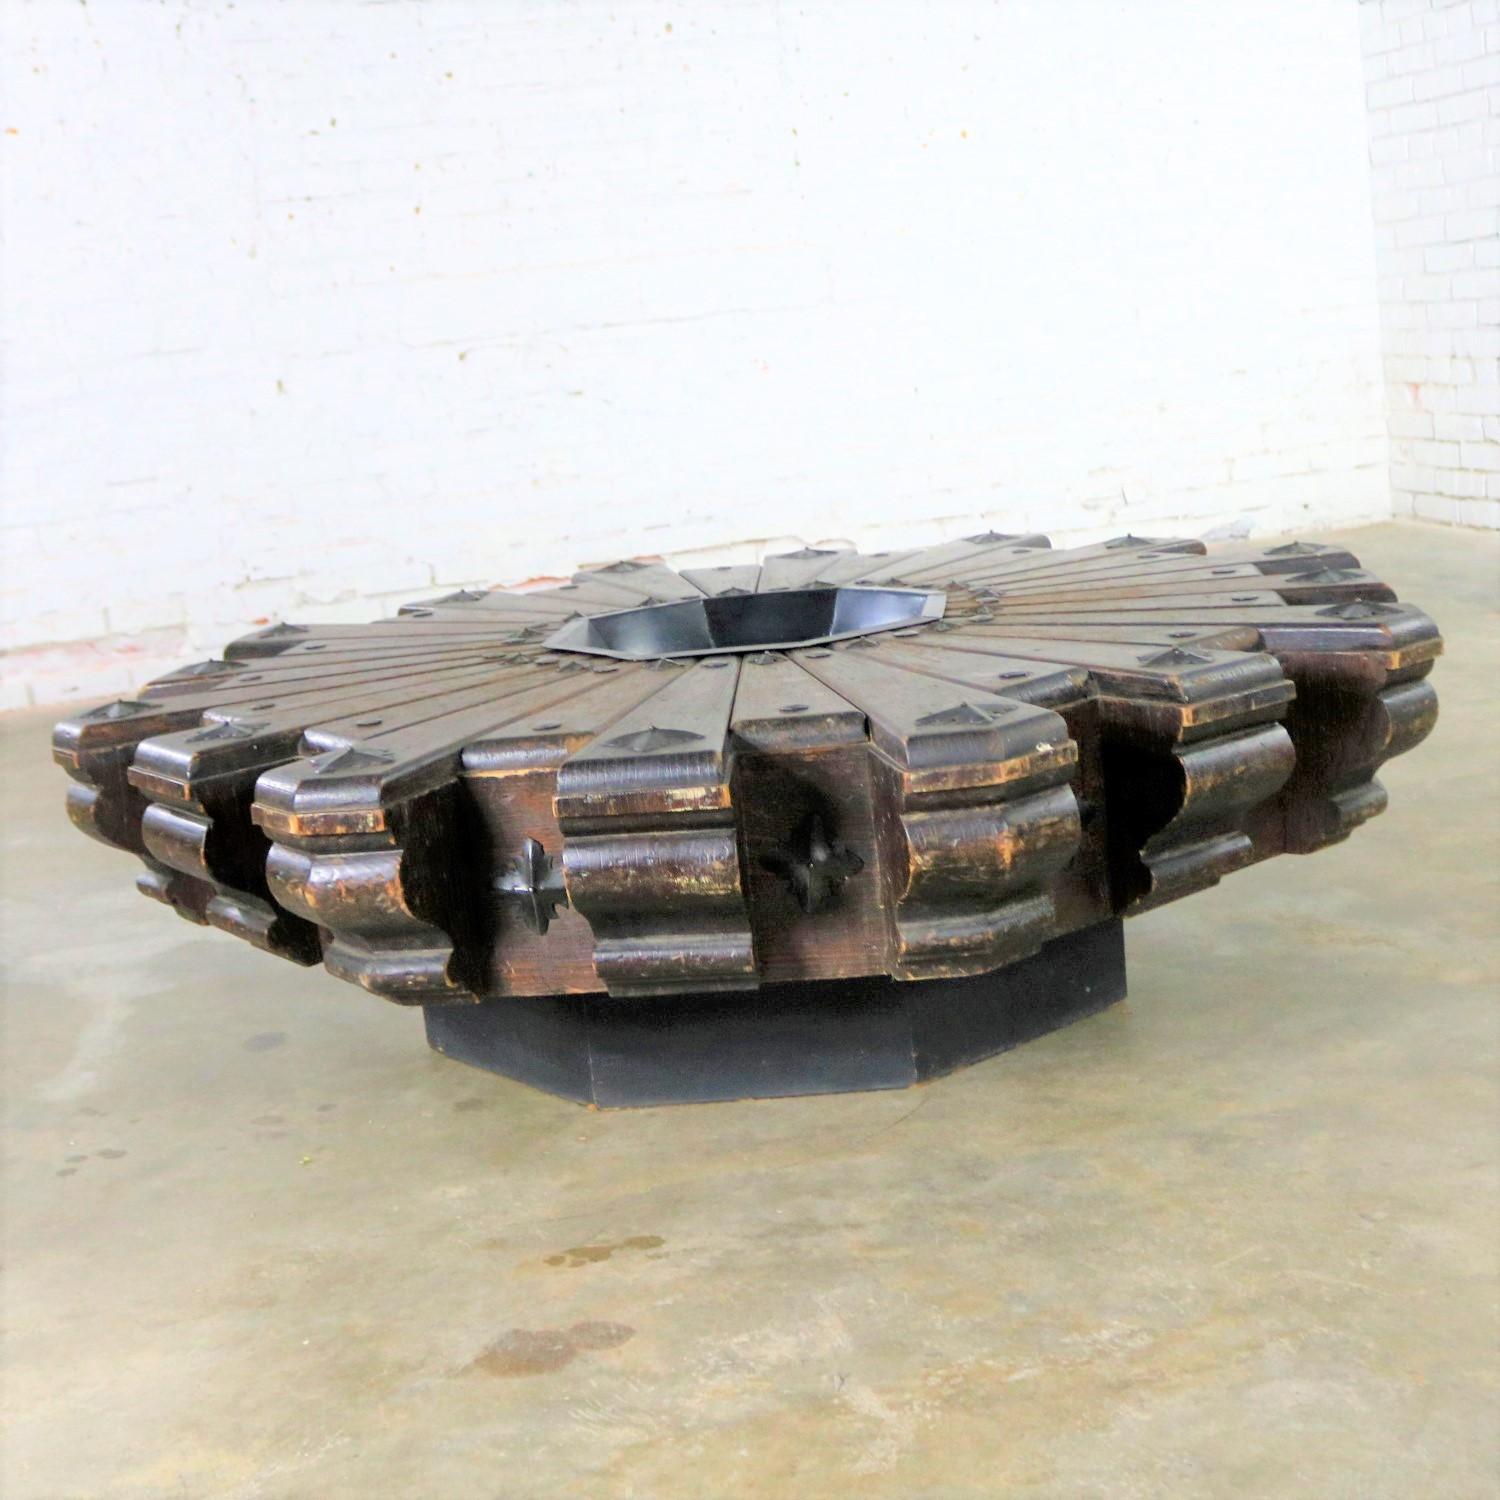 Amazing Spanish Revival style extra-large octagon pinwheel coffee table with a centre metal pan for fire pit cooking, plant or decor. This table is attributed to Artes De Mexico Internacionales, SA and retains a partial tag which looks much like the